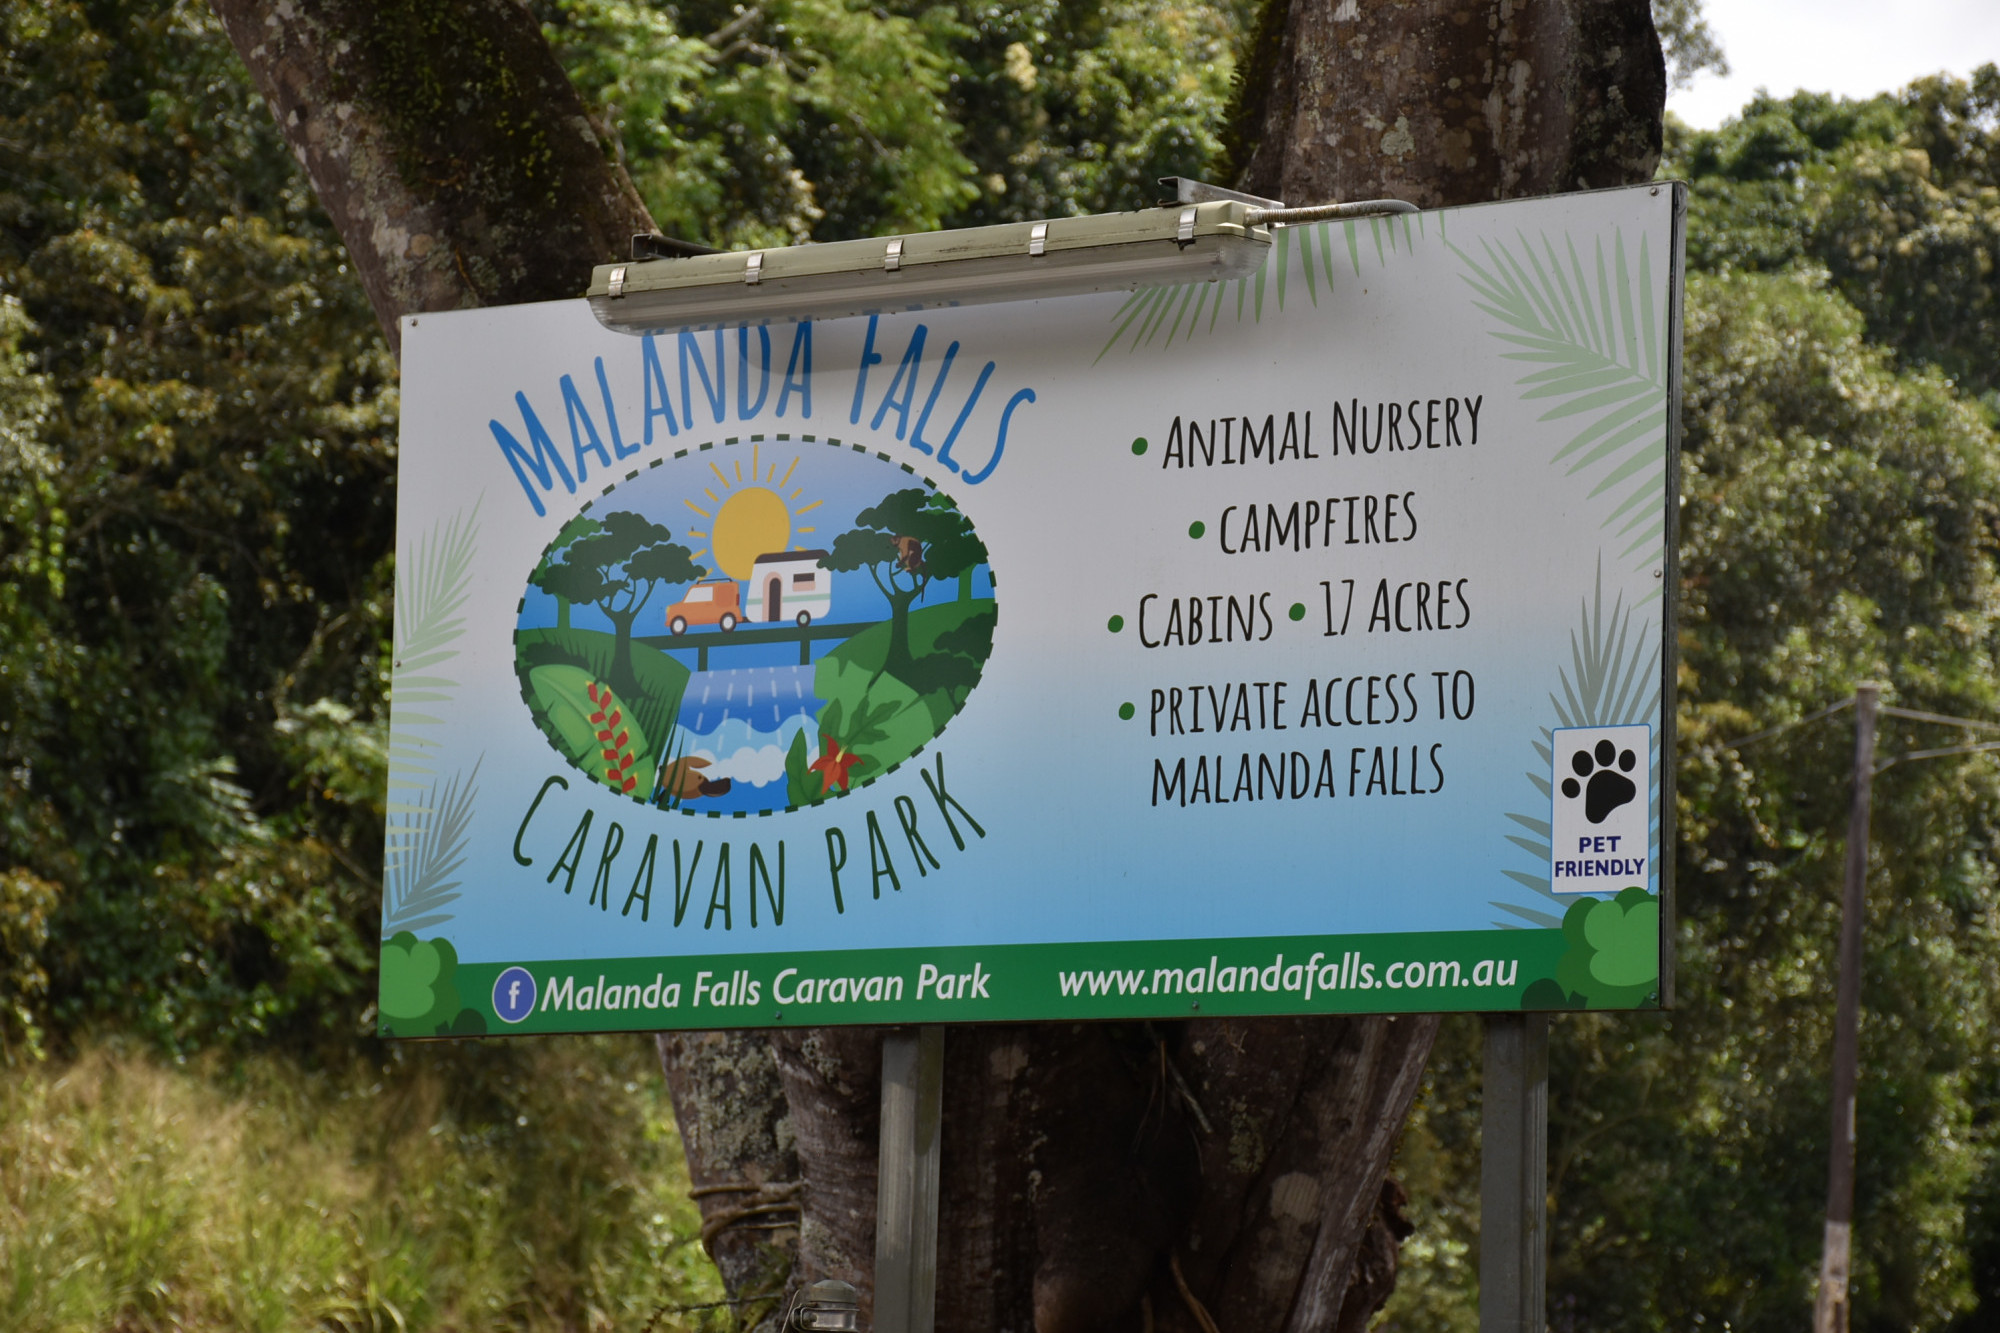 Expressions of interest are being sought to take over the lease of The Malanda Falls Caravan Park